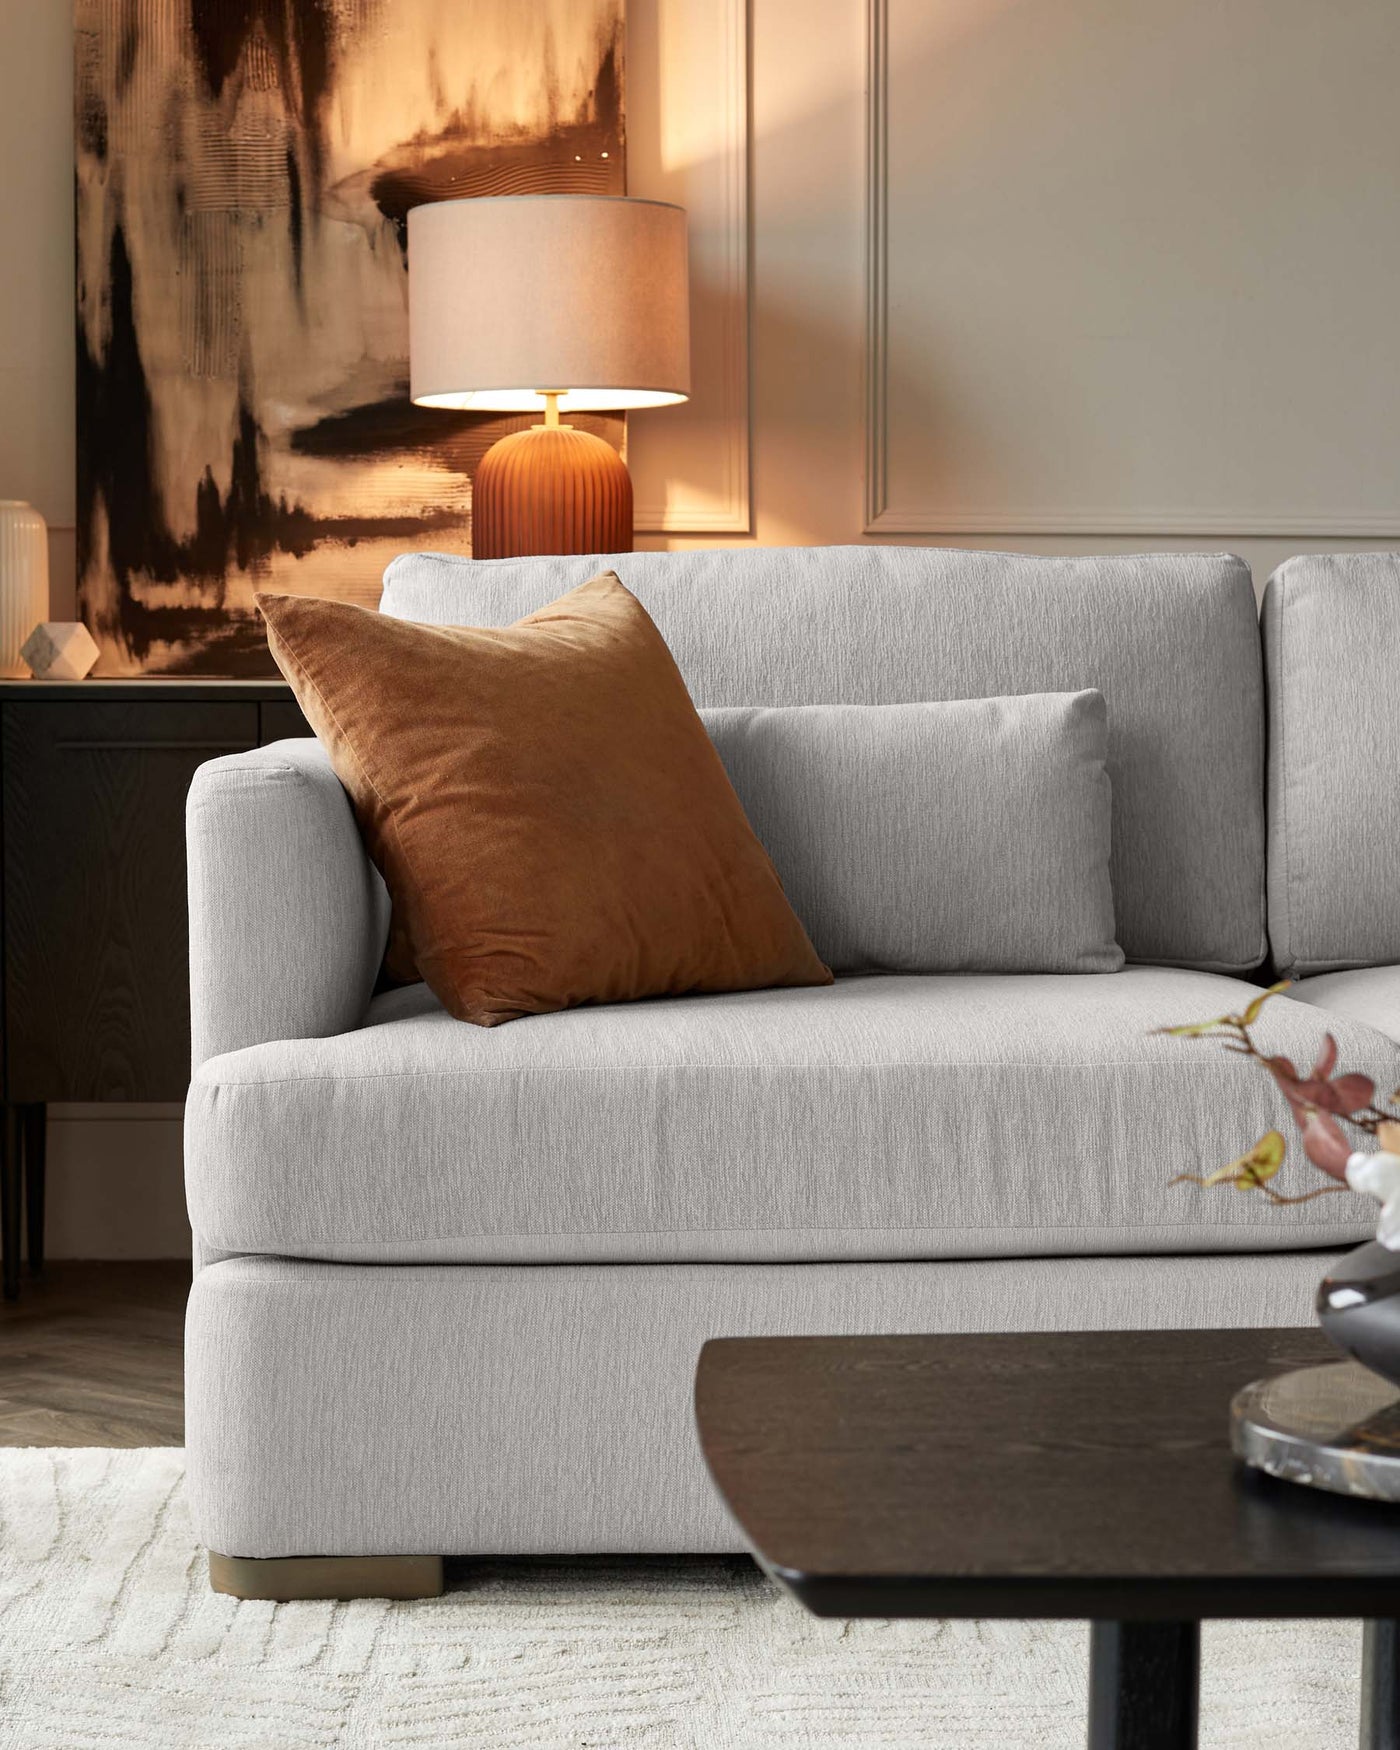 Contemporary light grey fabric sofa with plush cushions and a single brown decorative pillow, paired with a dark wooden coffee table in an understated modern design, situated on a textured off-white area rug. A black wooden sideboard and a stylish table lamp with an orange base and a beige shade enhance the warm and inviting ambiance of the living space.